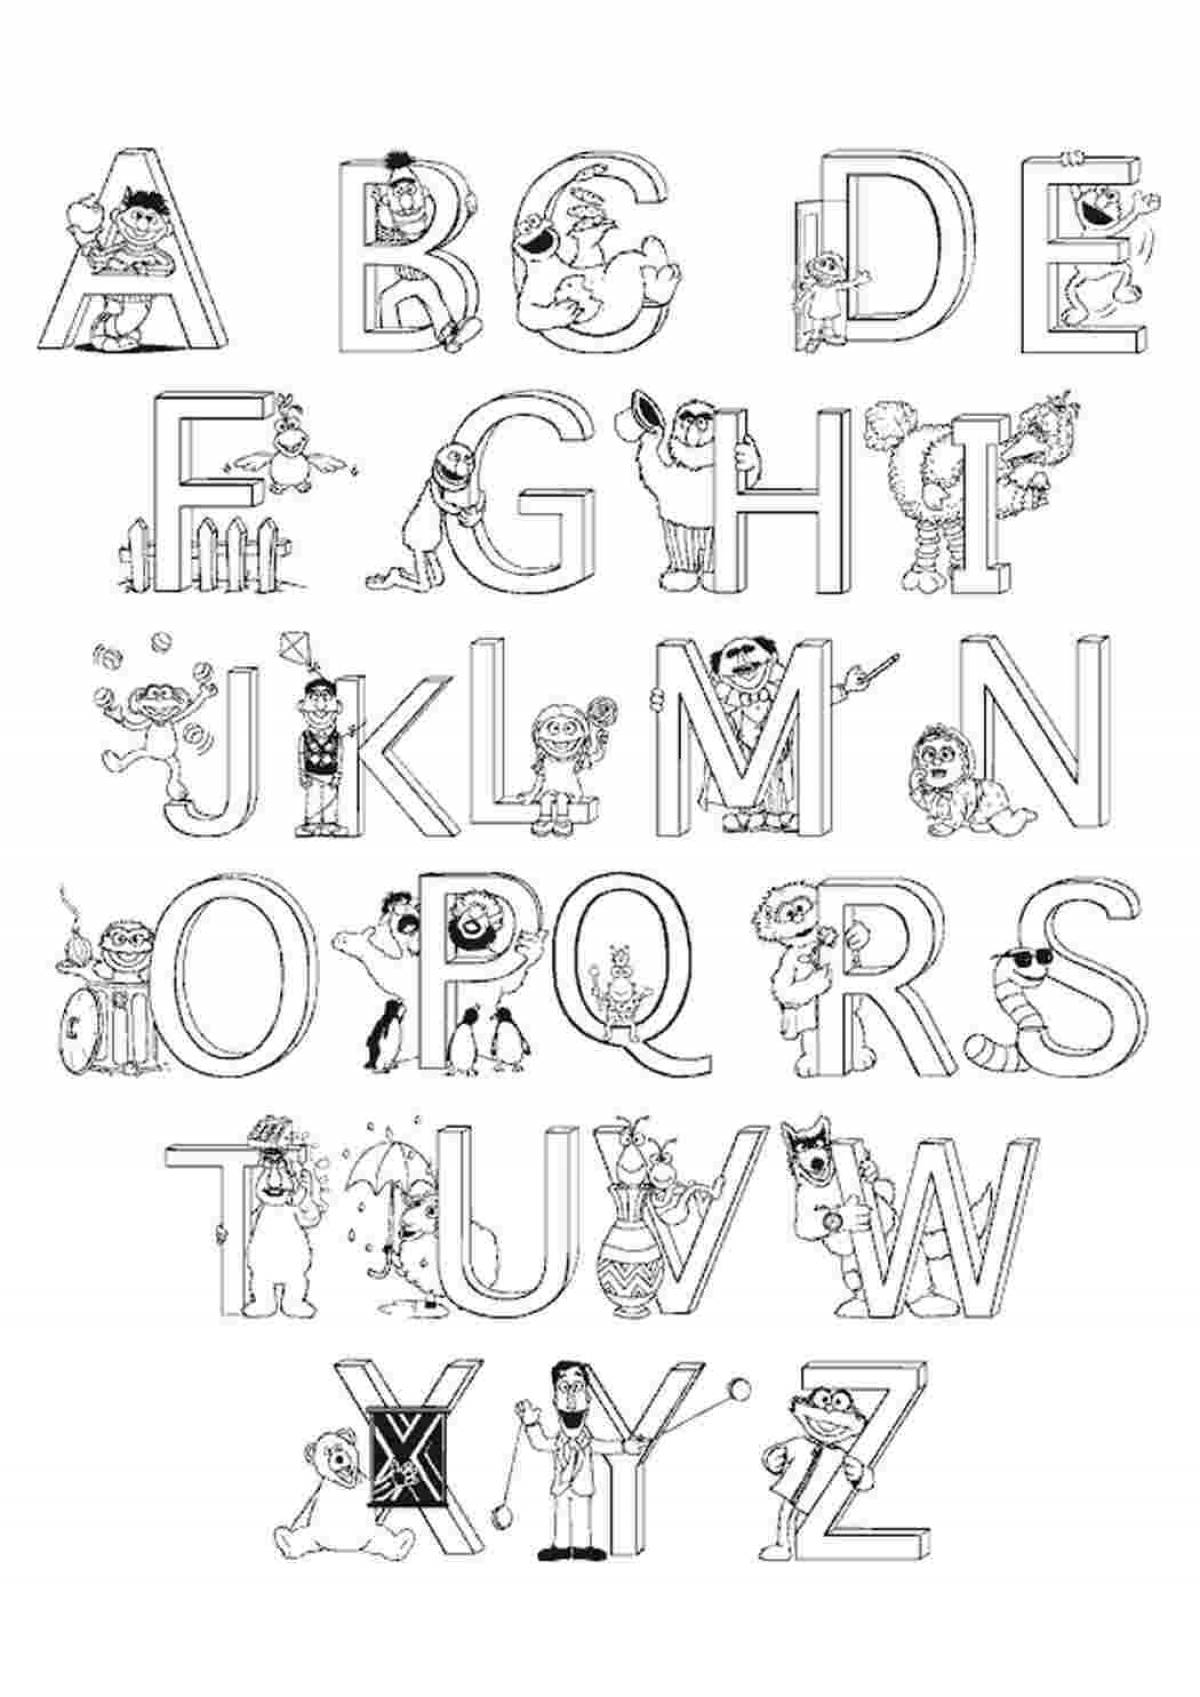 Lore alphabet colorful coloring page to develop children's creativity